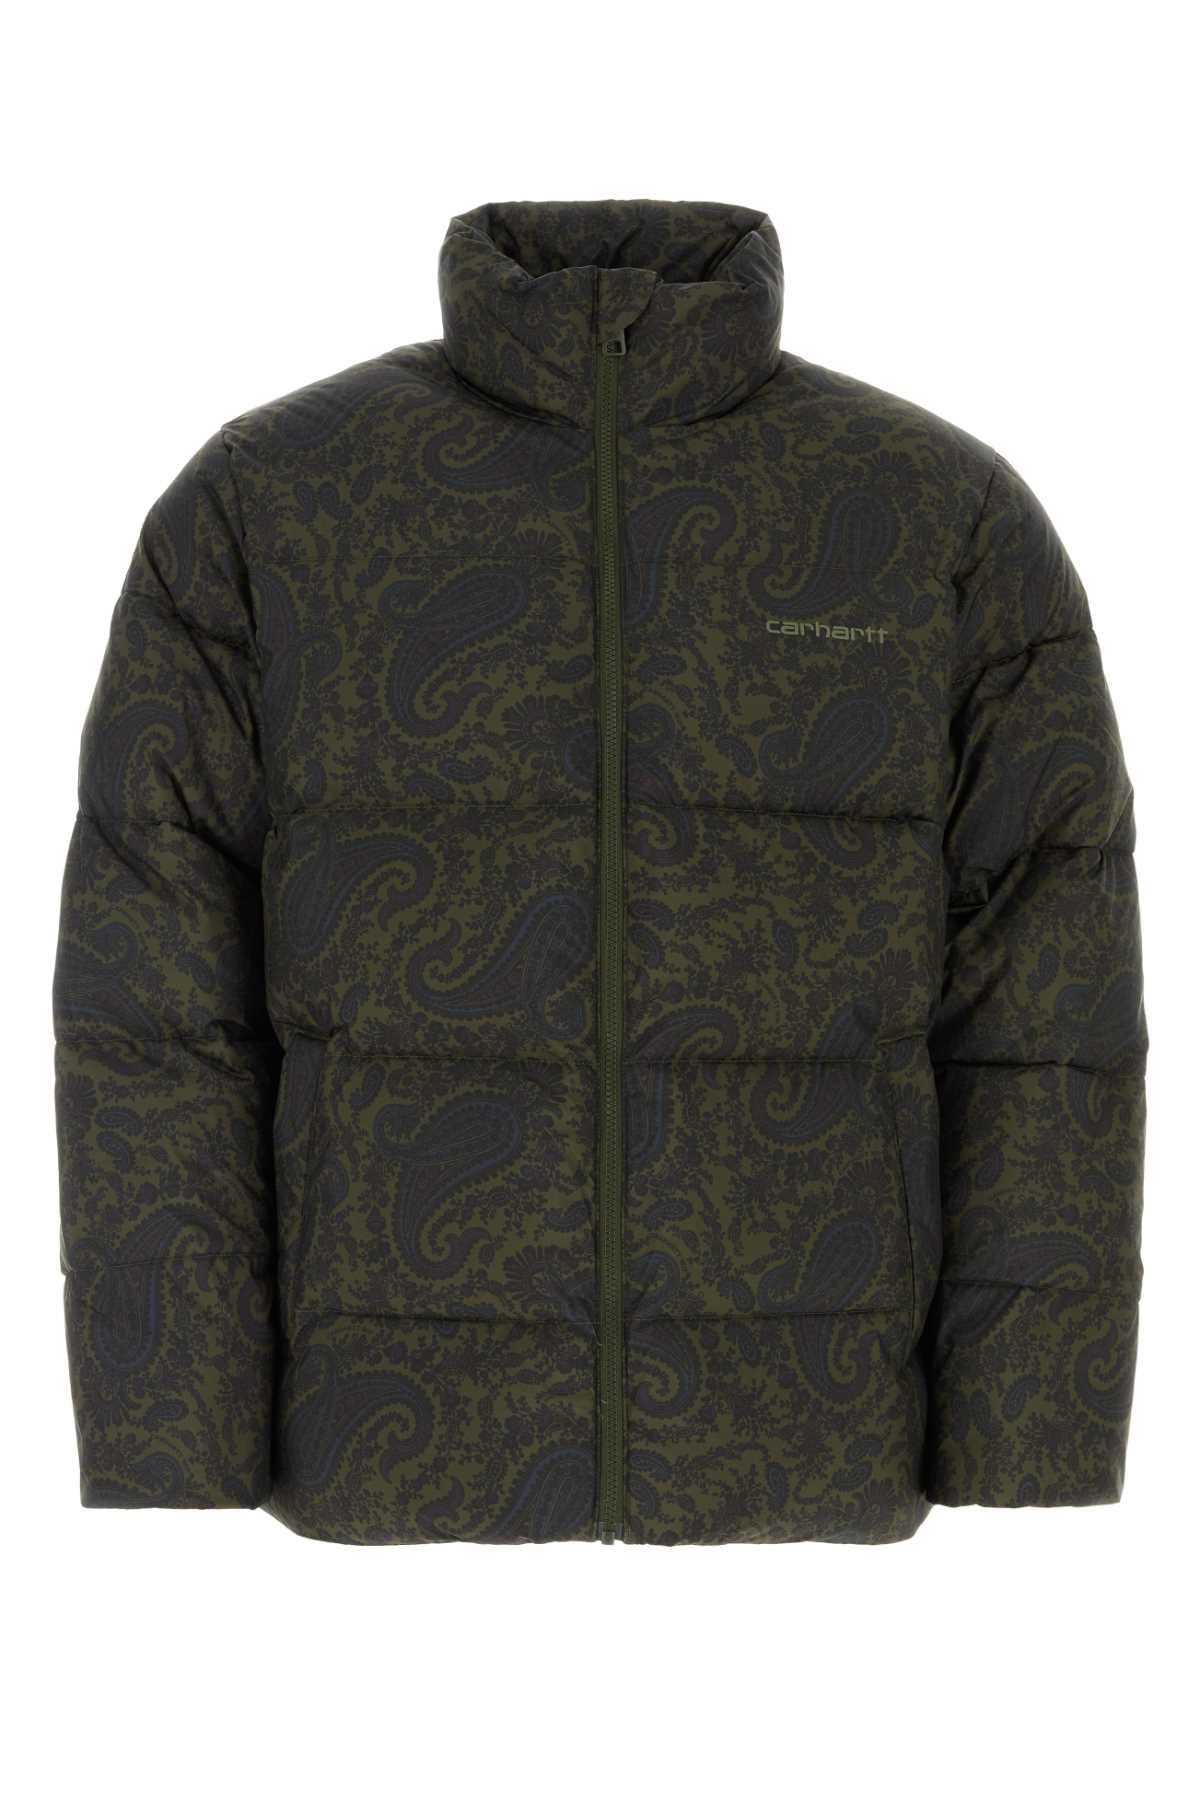 Printed Polyester Springfield Jacket